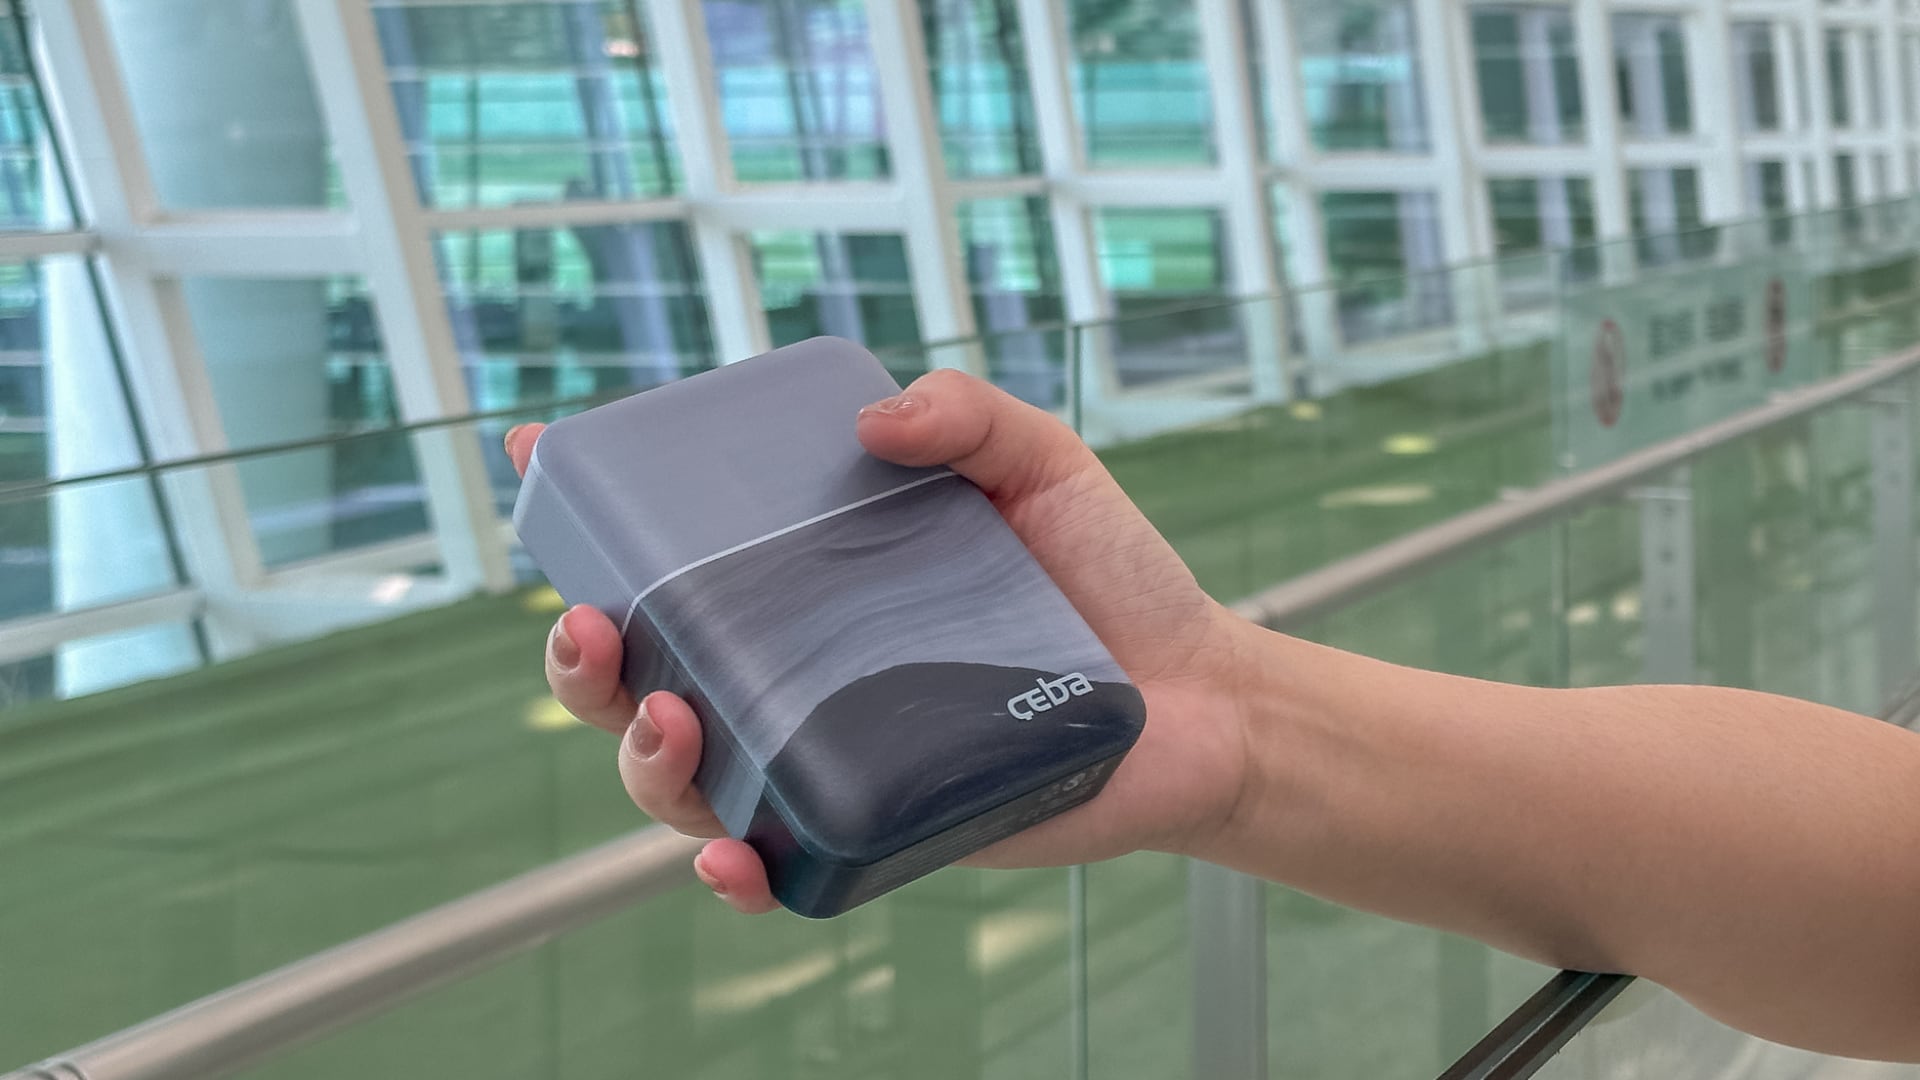 Person's hand holding Ceba RAPI power bank at the airport